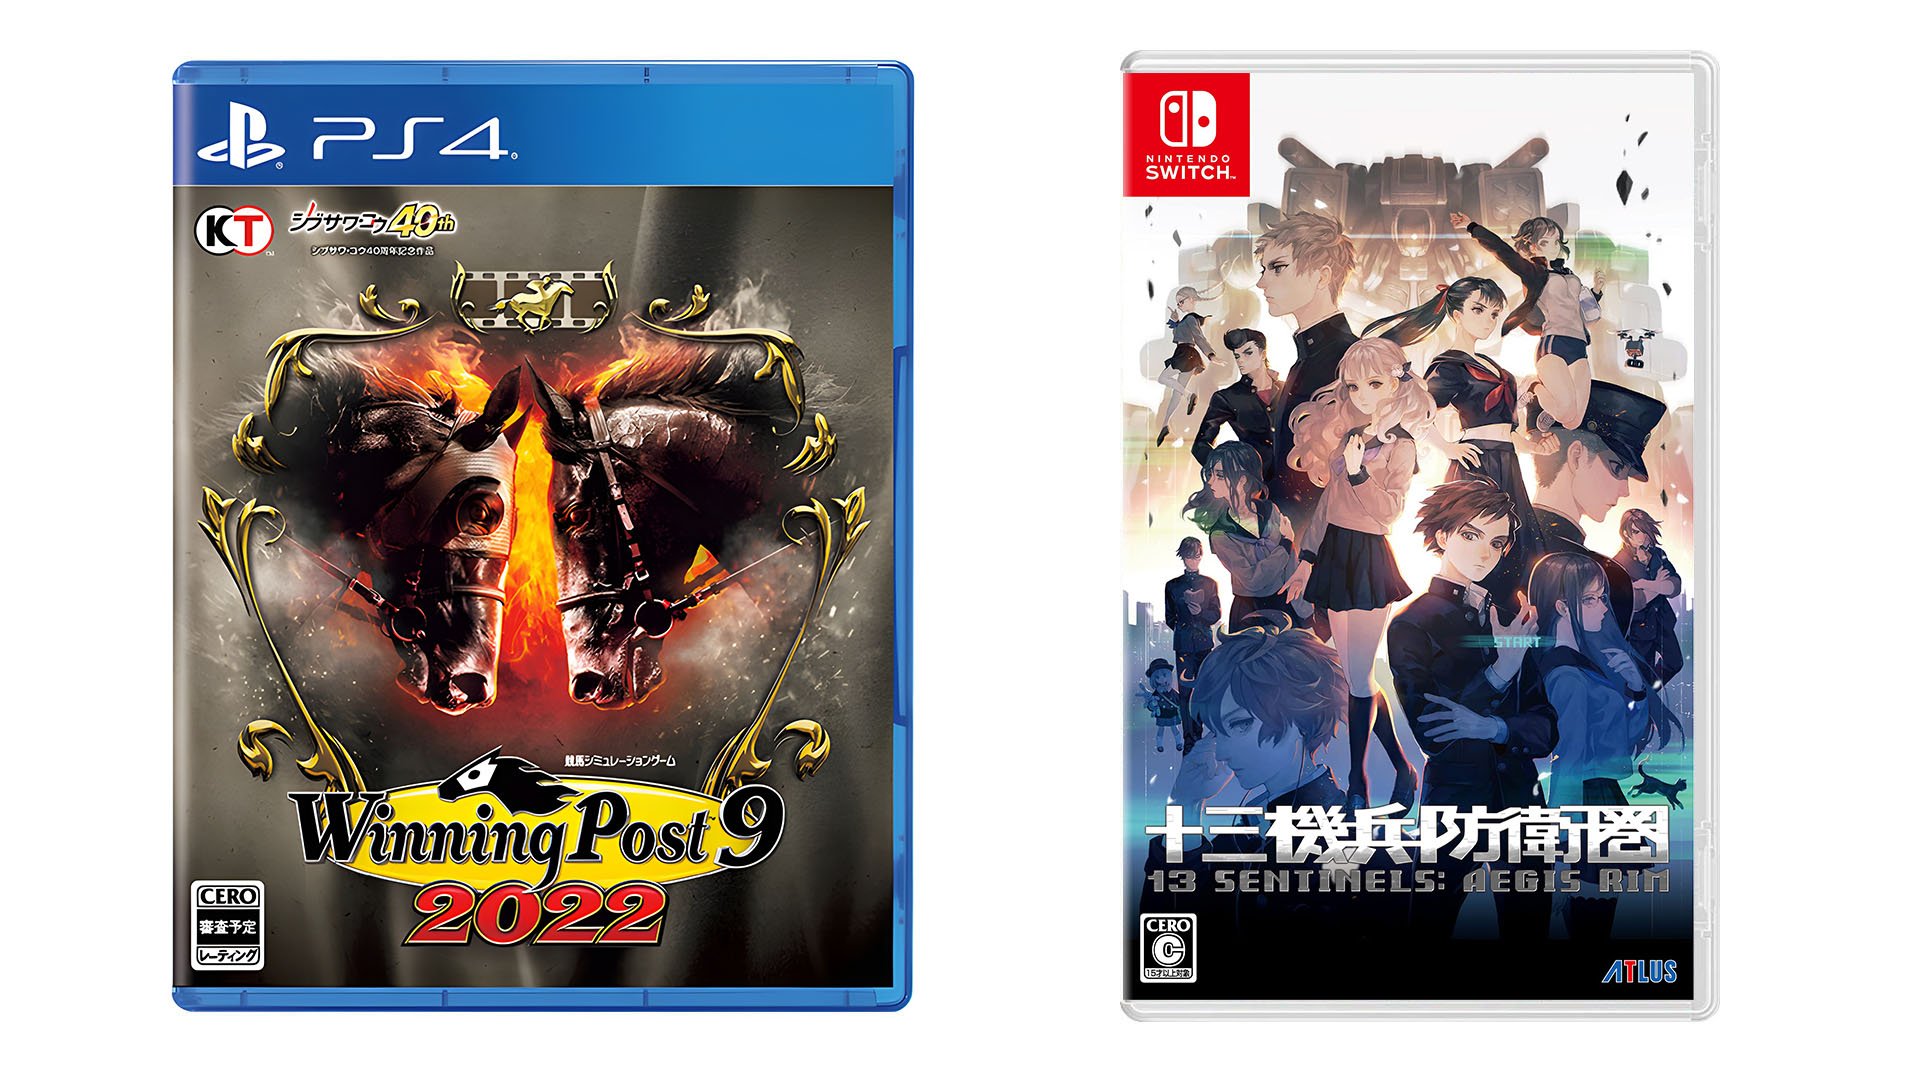 #
      This Week’s Japanese Game Releases: 13 Sentinels: Aegis Rim for Switch, Winning Post 9 2022, more